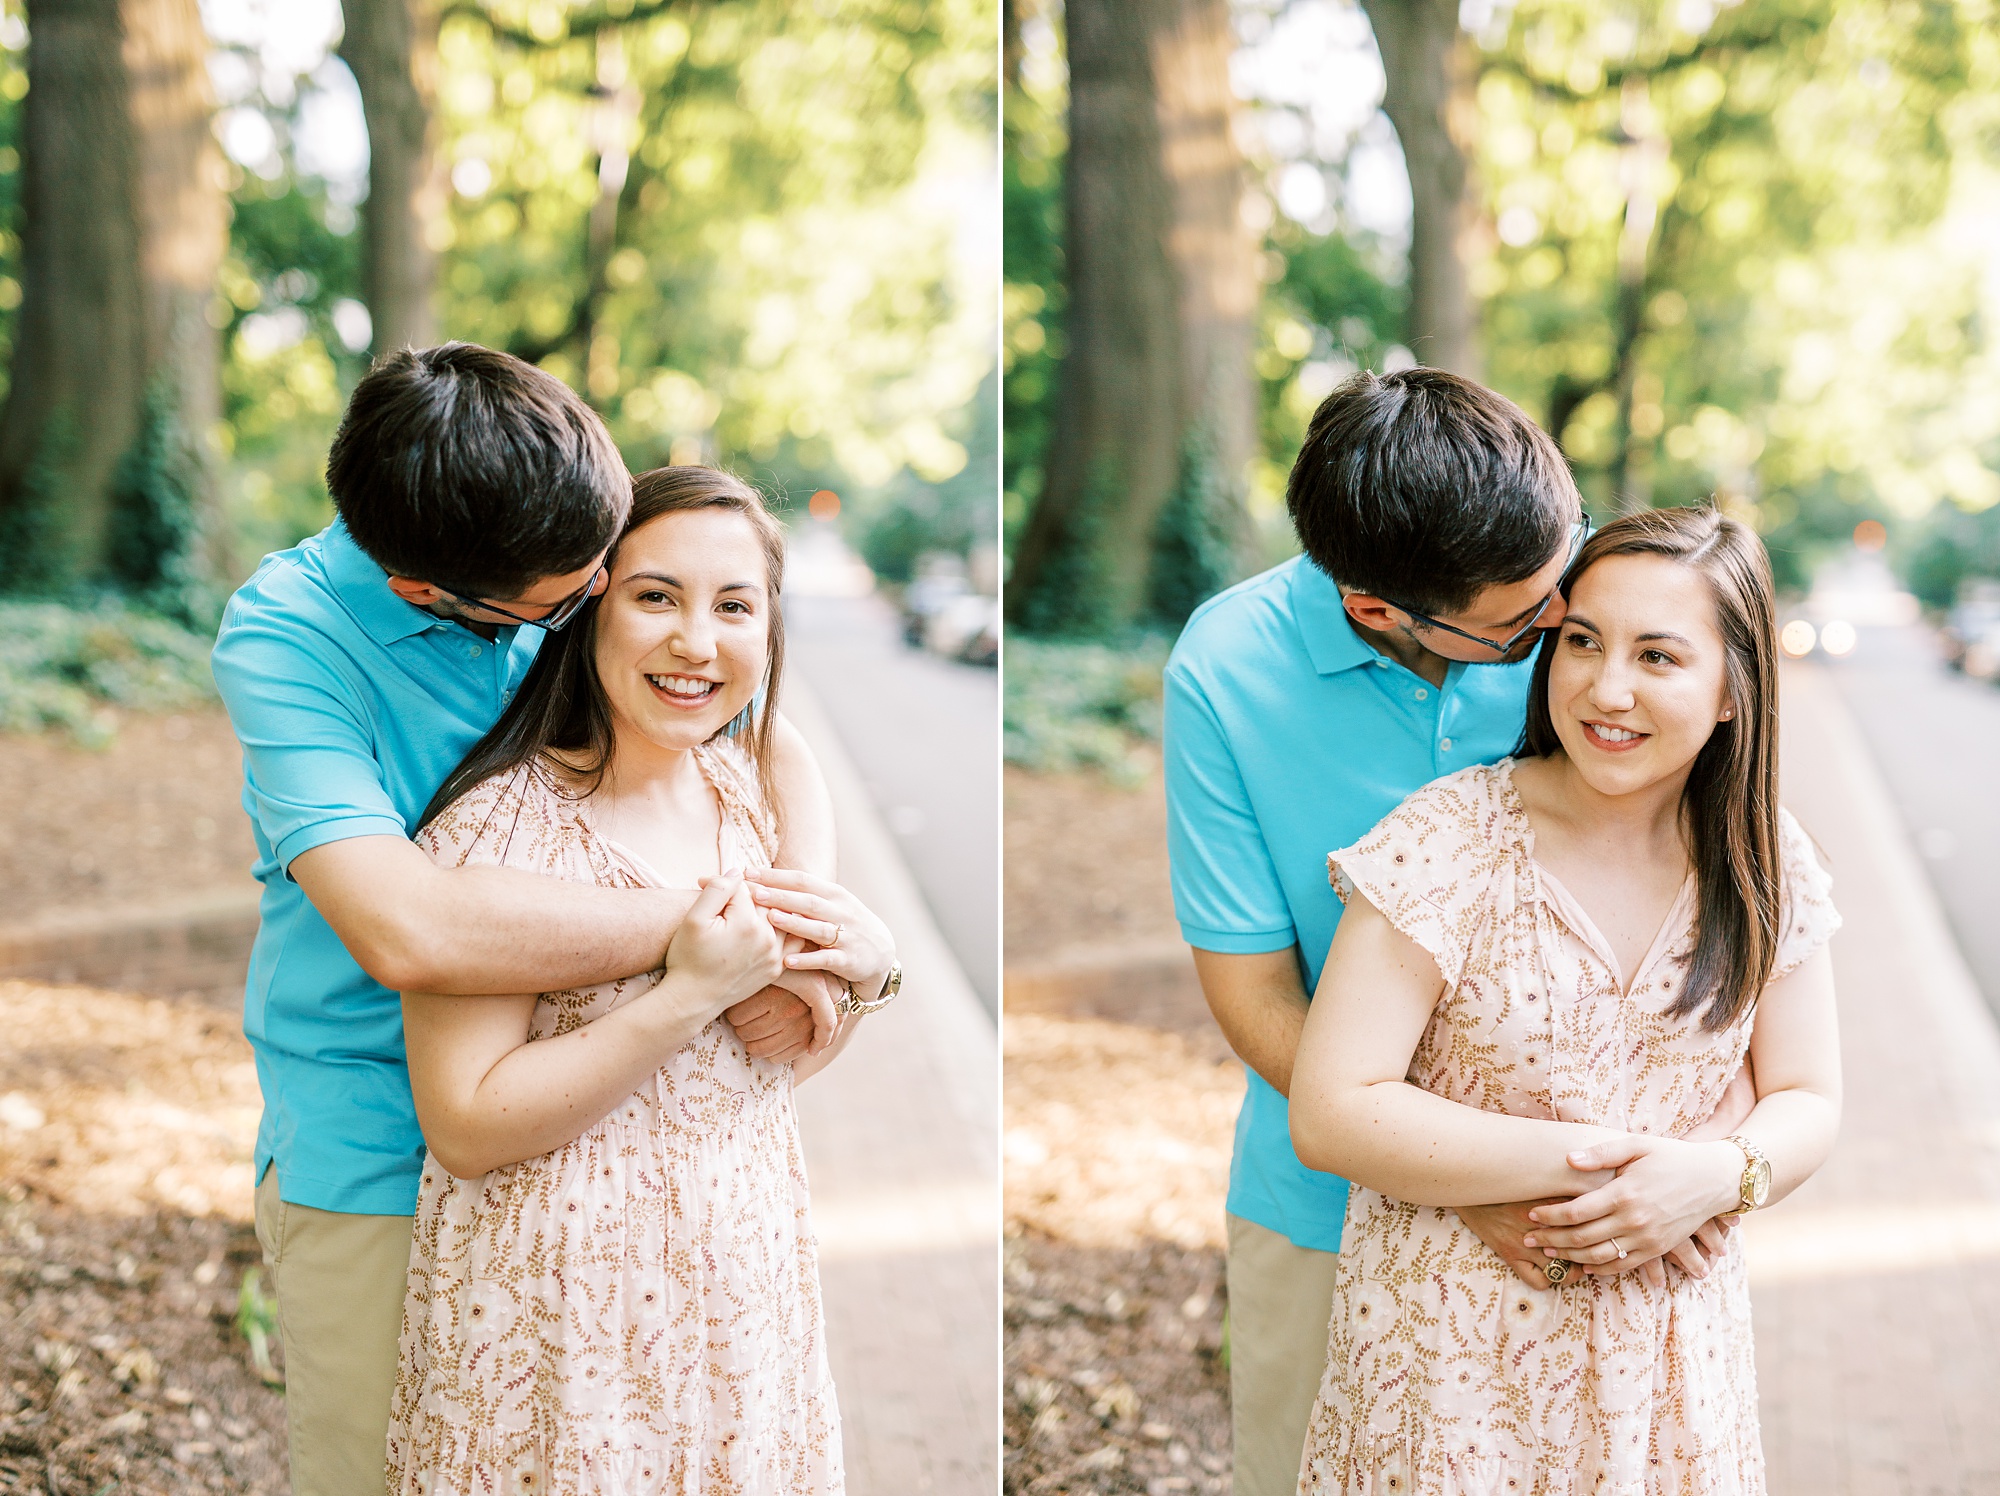 Fourth Ward Park engagement session with Kevyn Dixon Photography